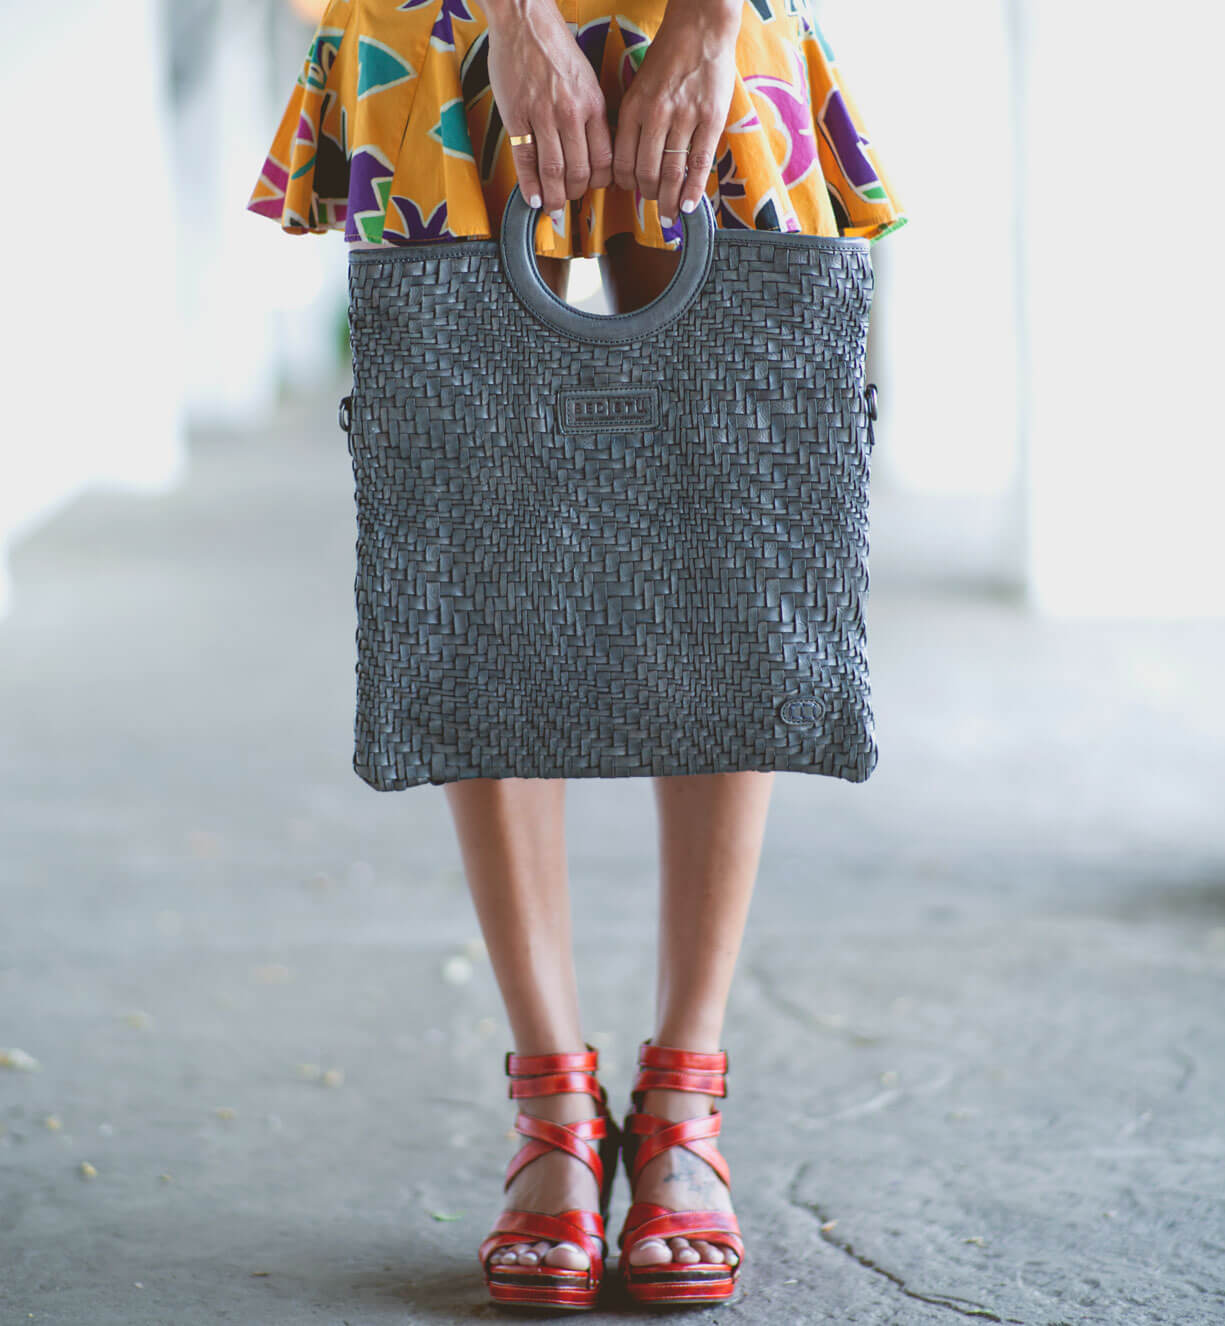 A woman wearing a colorful dress and sandals holding a Bed Stu Adele woven tote.